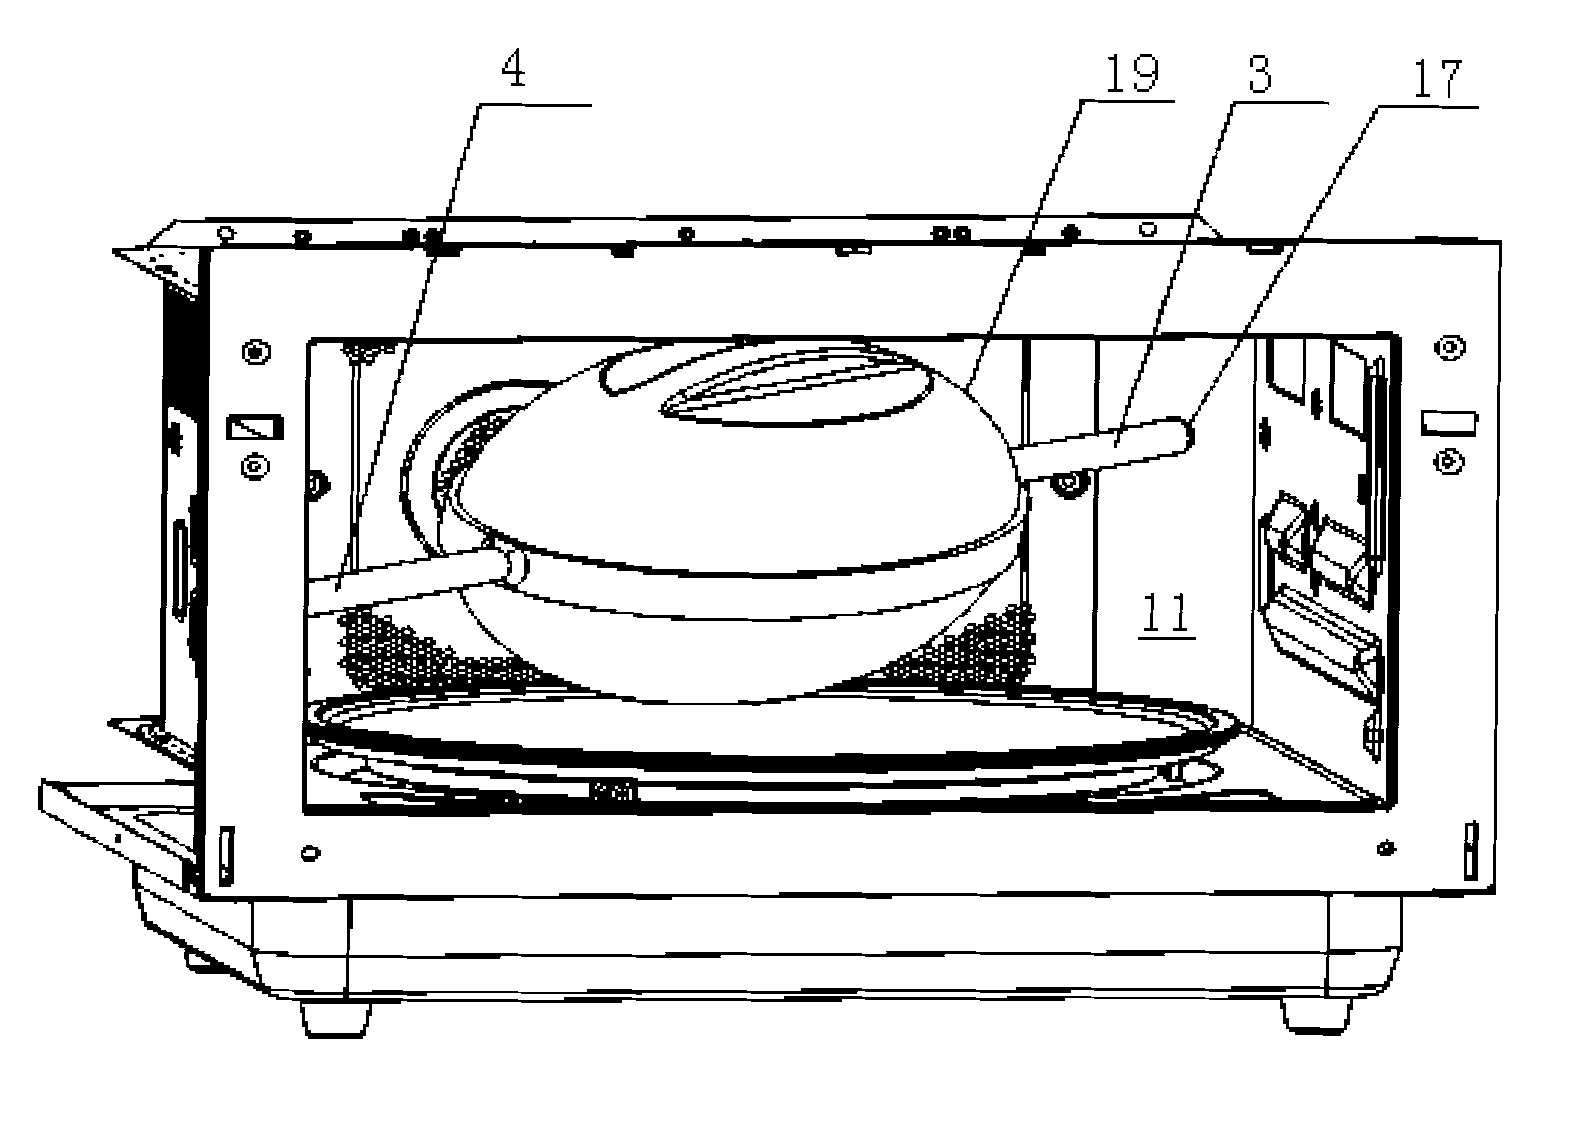 Energy-saving frying pan structure for microwave oven